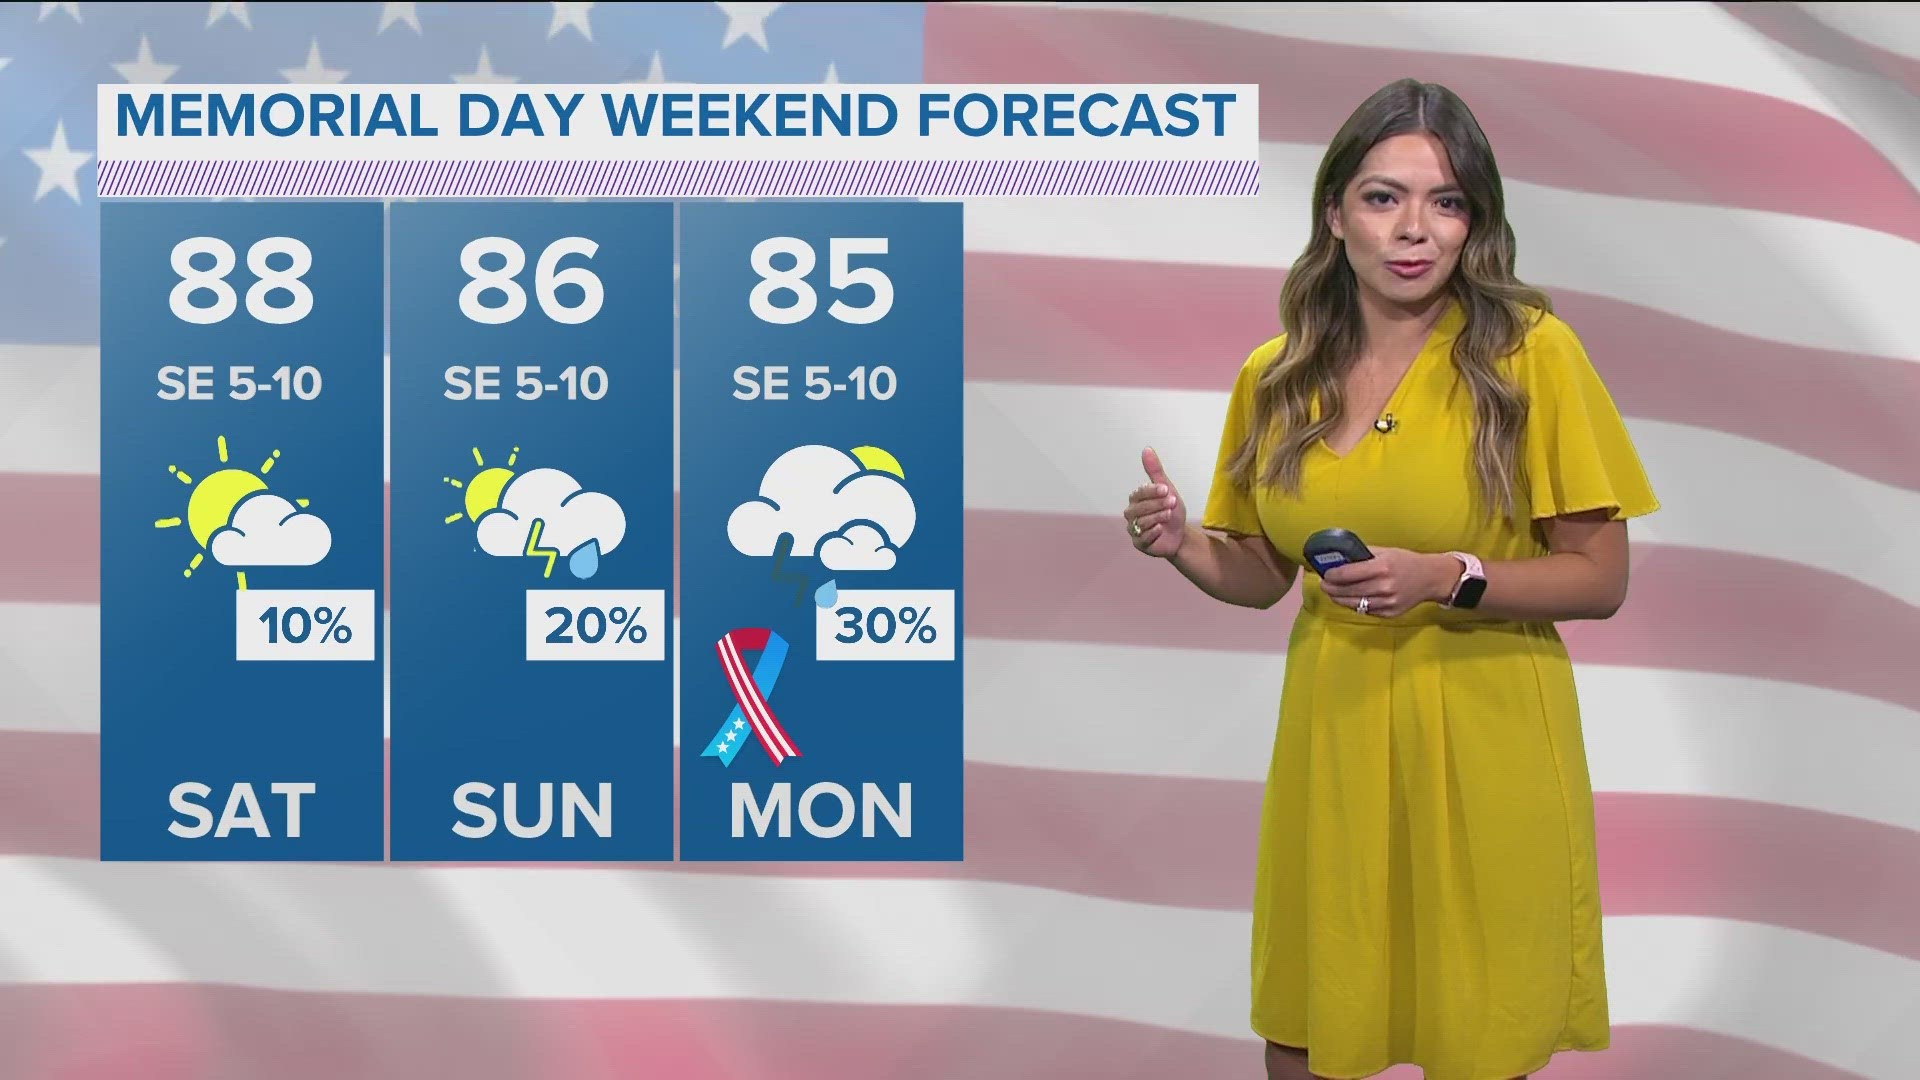 DFW Weather: Memorial Day weekend looks warm with some storm chances in North Texas.